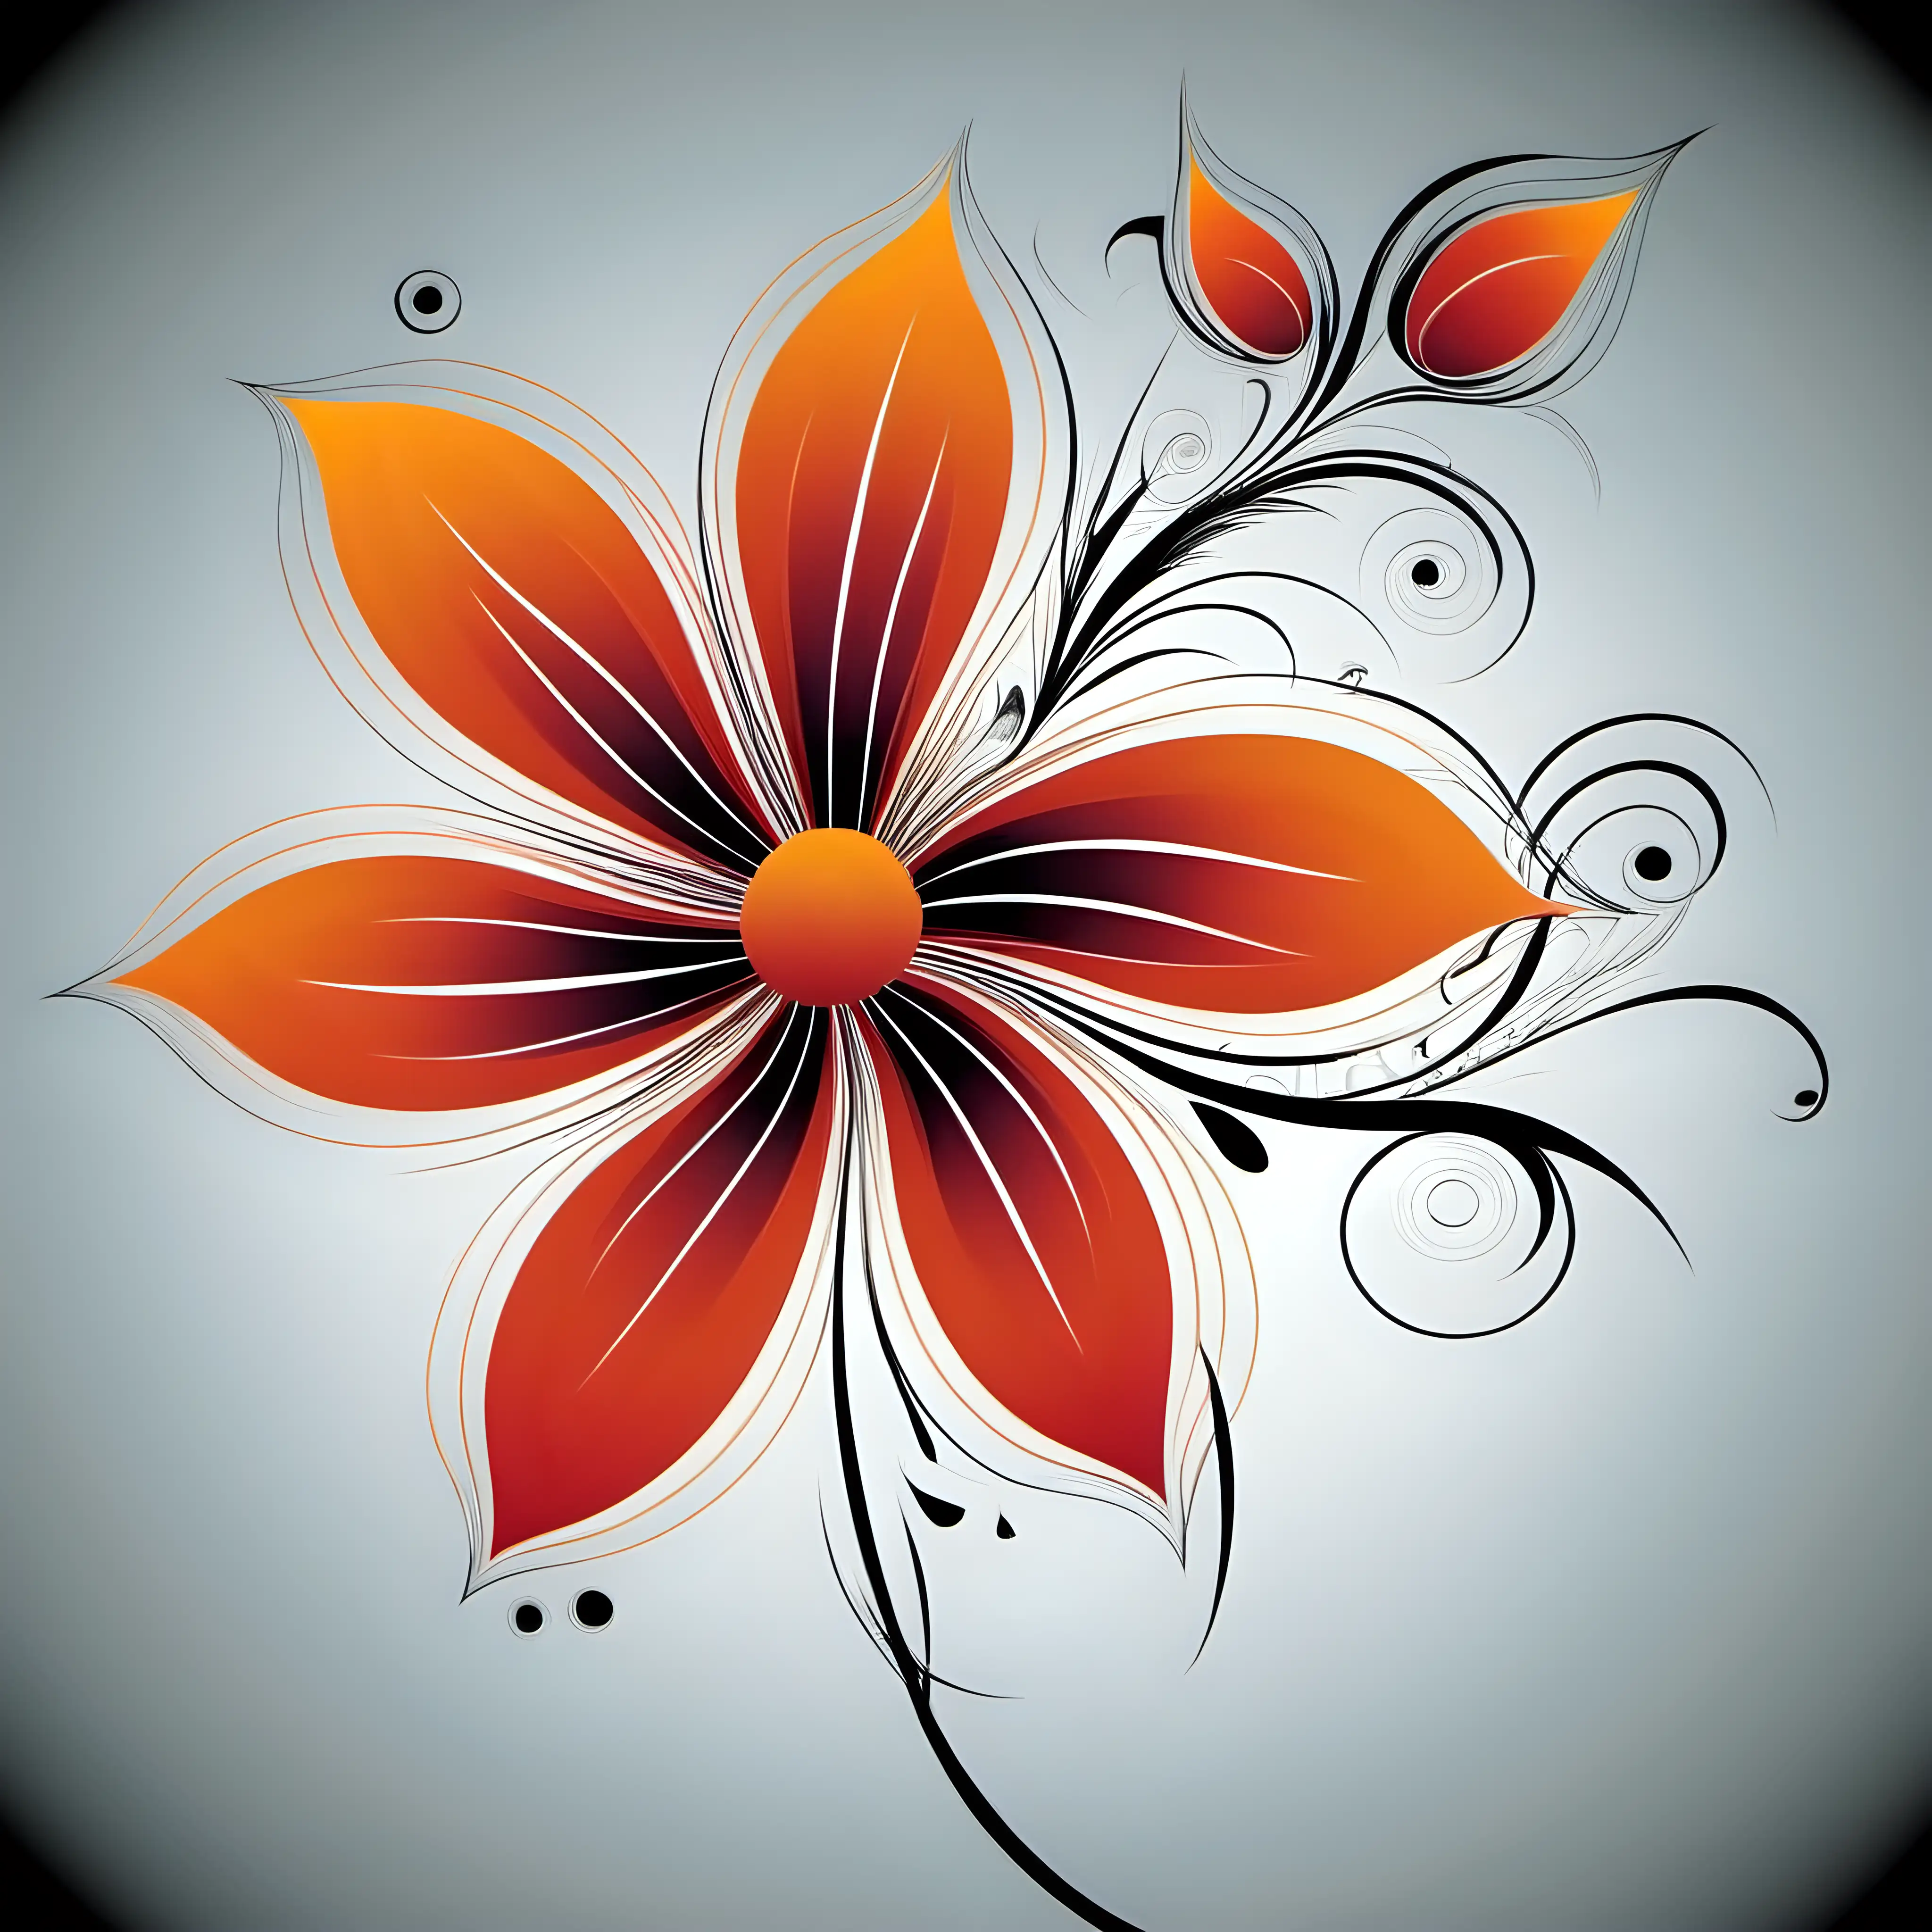 Stylish Vector Abstraction of a Flower